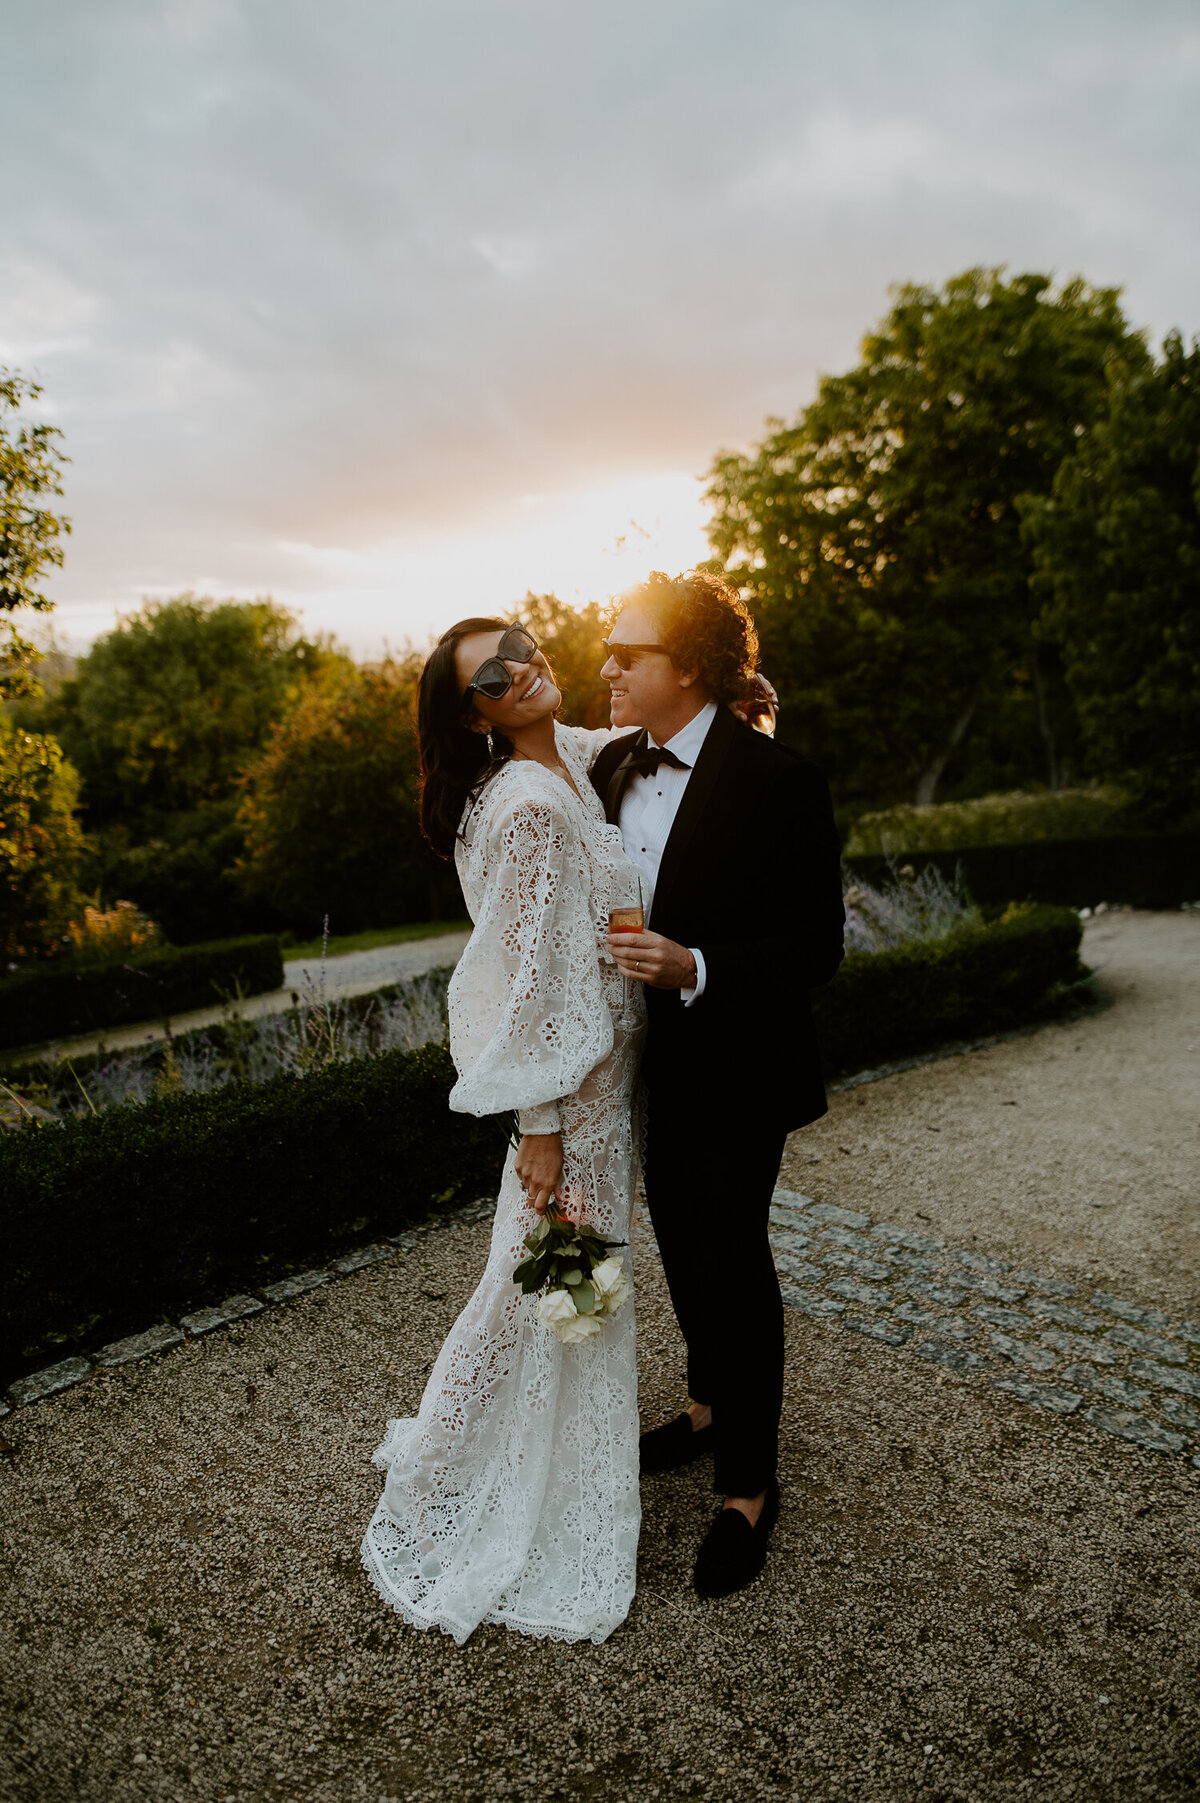 Martine McCutcheon and her husband Jack enjoy the sunset at Beaverbrook in Surrey during their vow renewel. Martine is wearing a white dress and carrying flowers whilst jack is wearing a black tux.